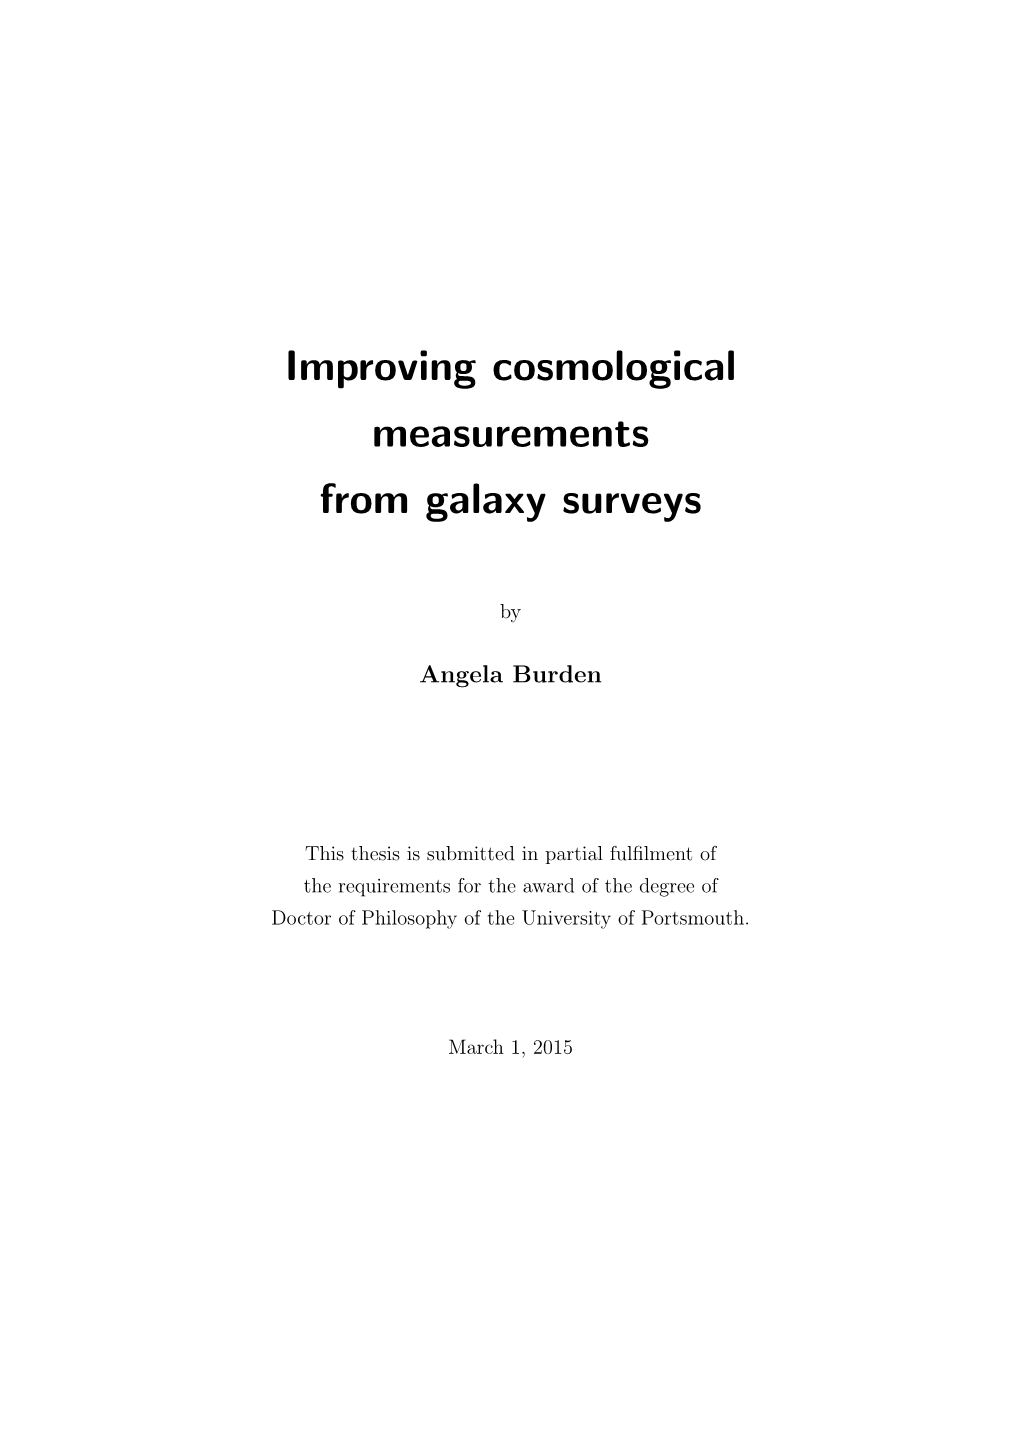 Improving Cosmological Measurements from Galaxy Surveys